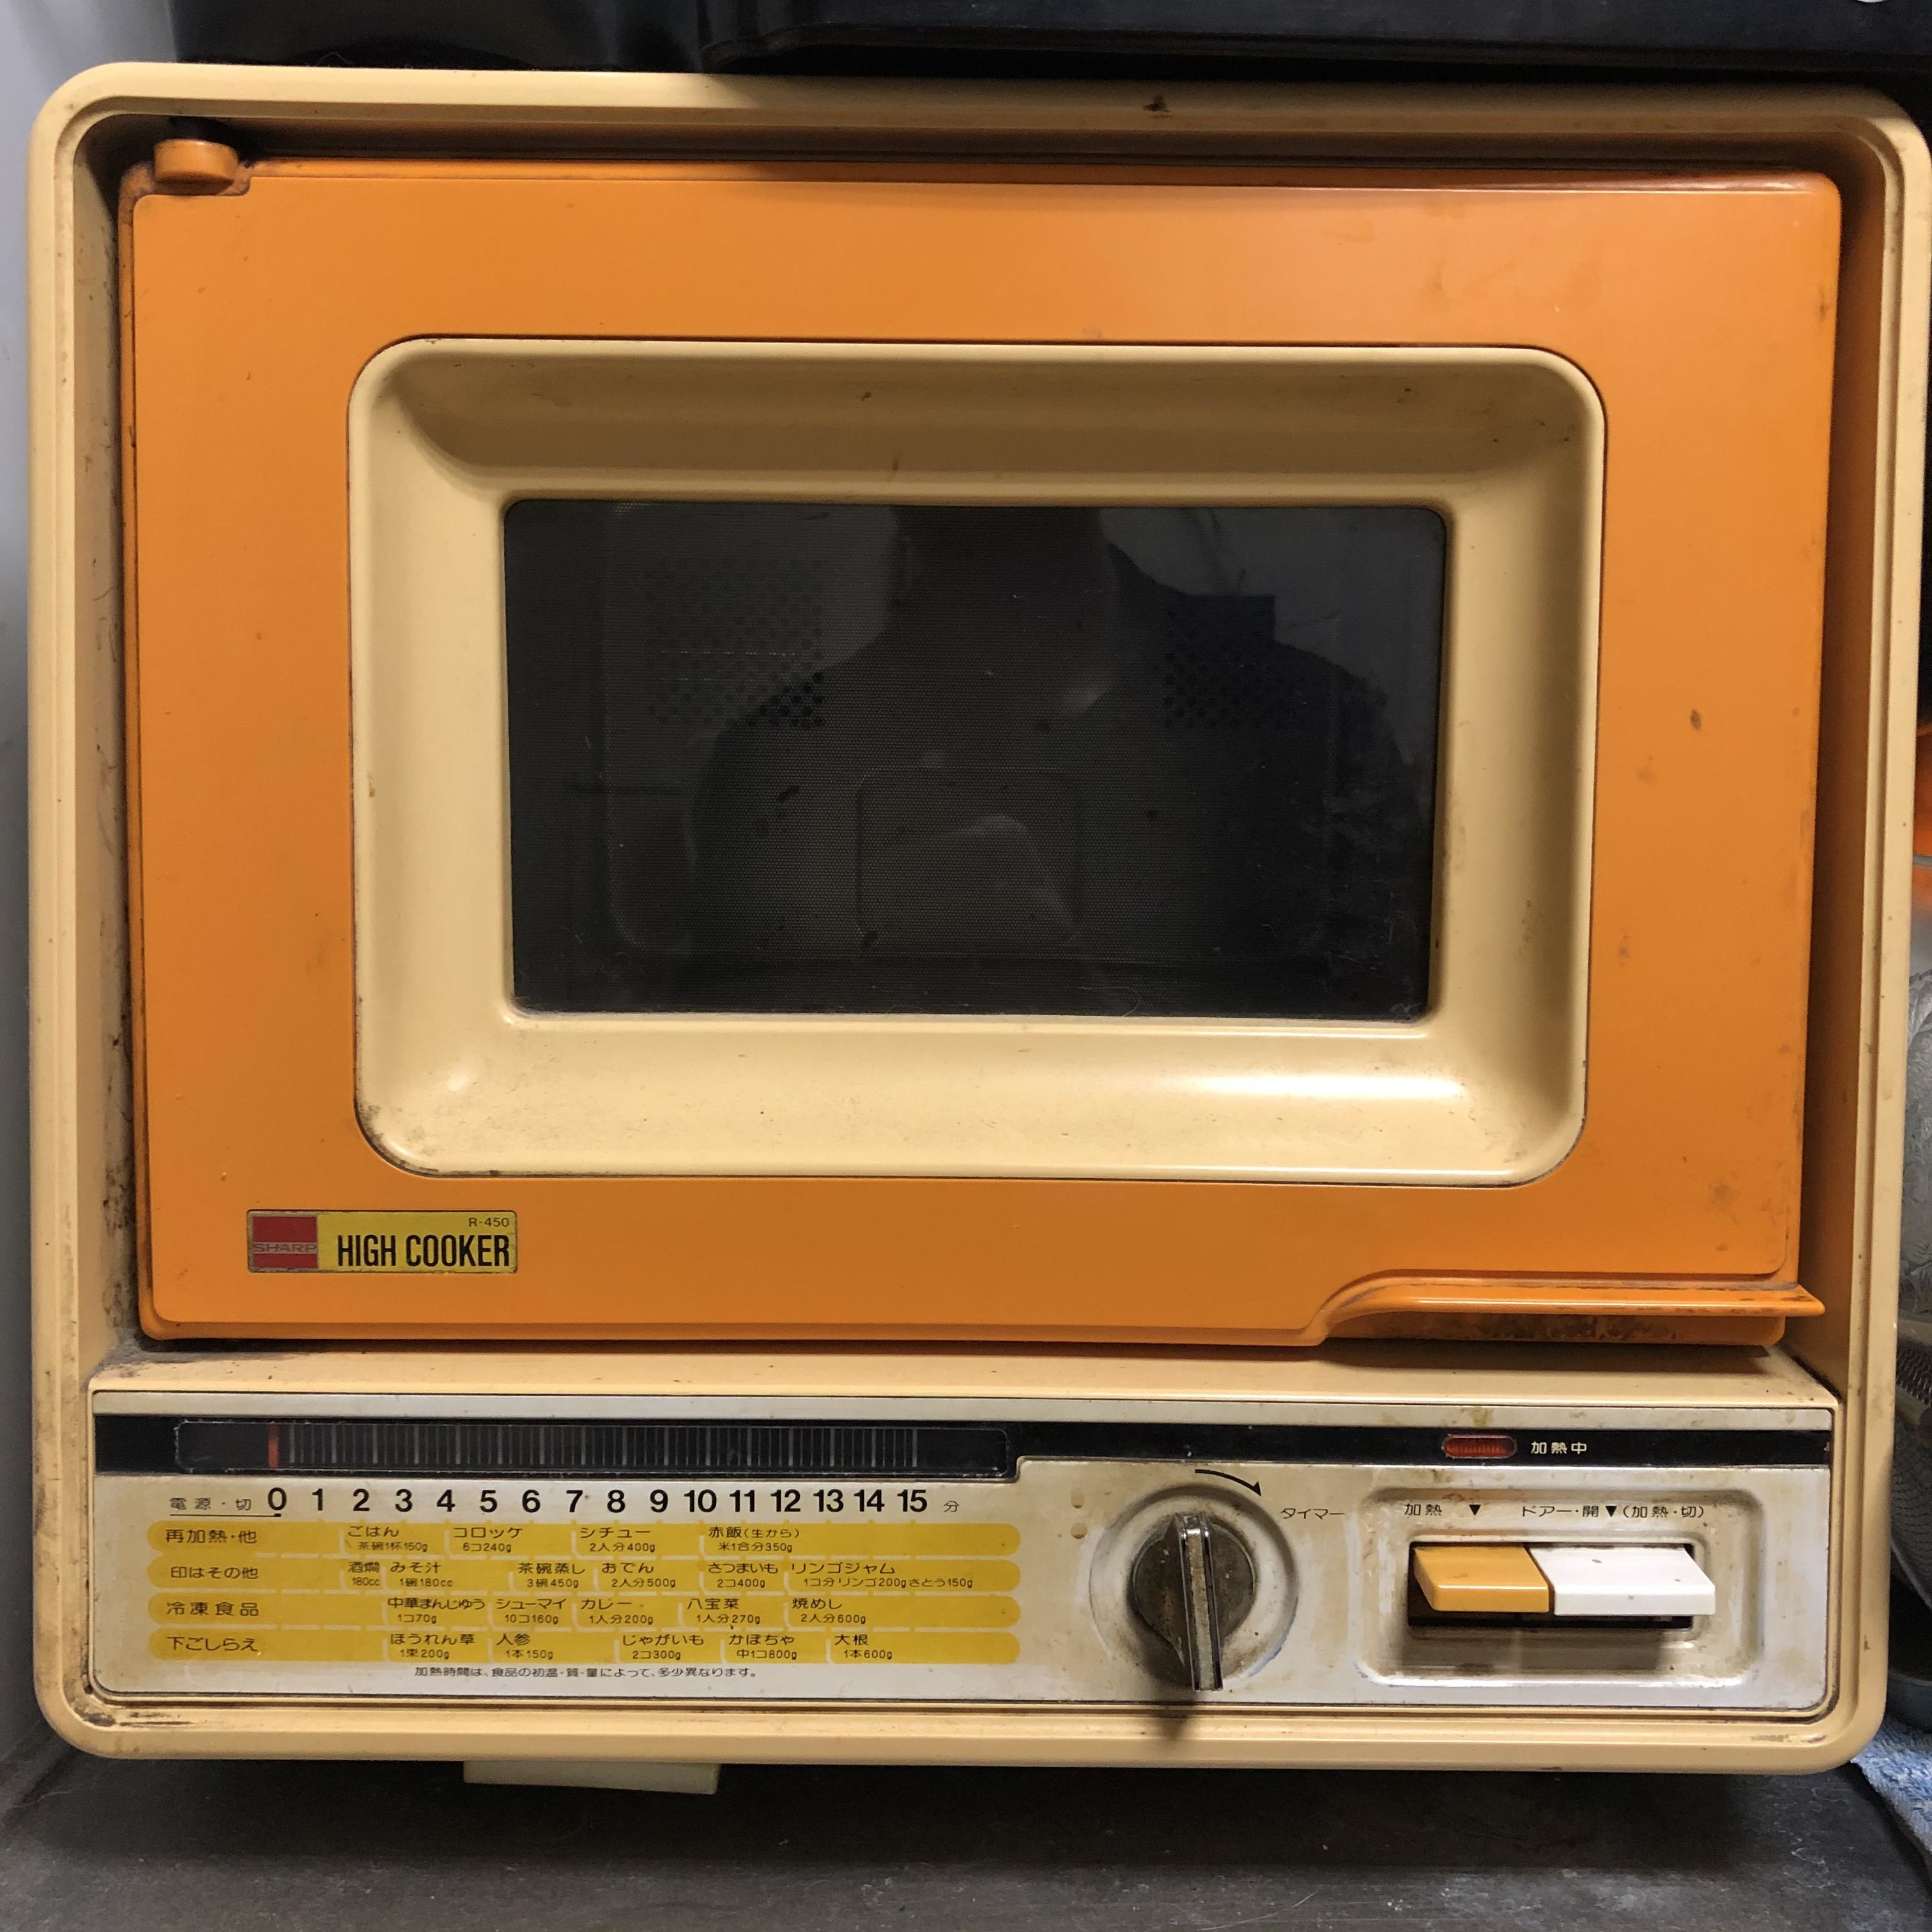 square microwave with a small viewing window and a knob for timer